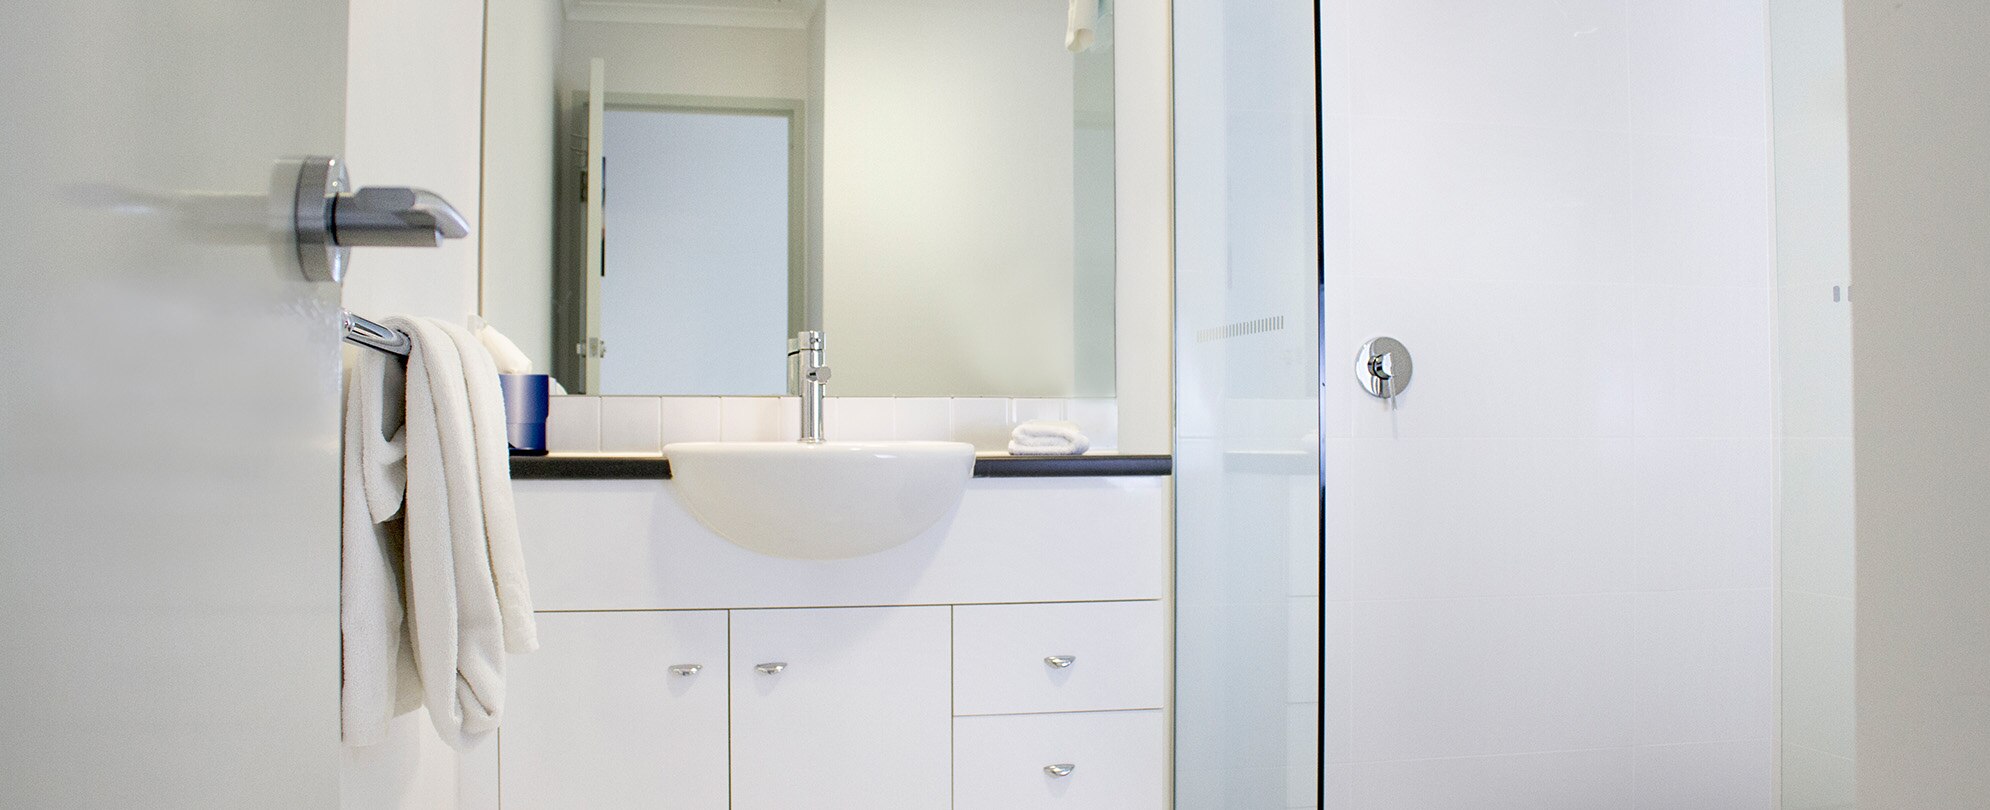 The bathroom sink and walk-in shower in a 1-bedroom deluxe suite at Club Wyndham Shoal Bay.